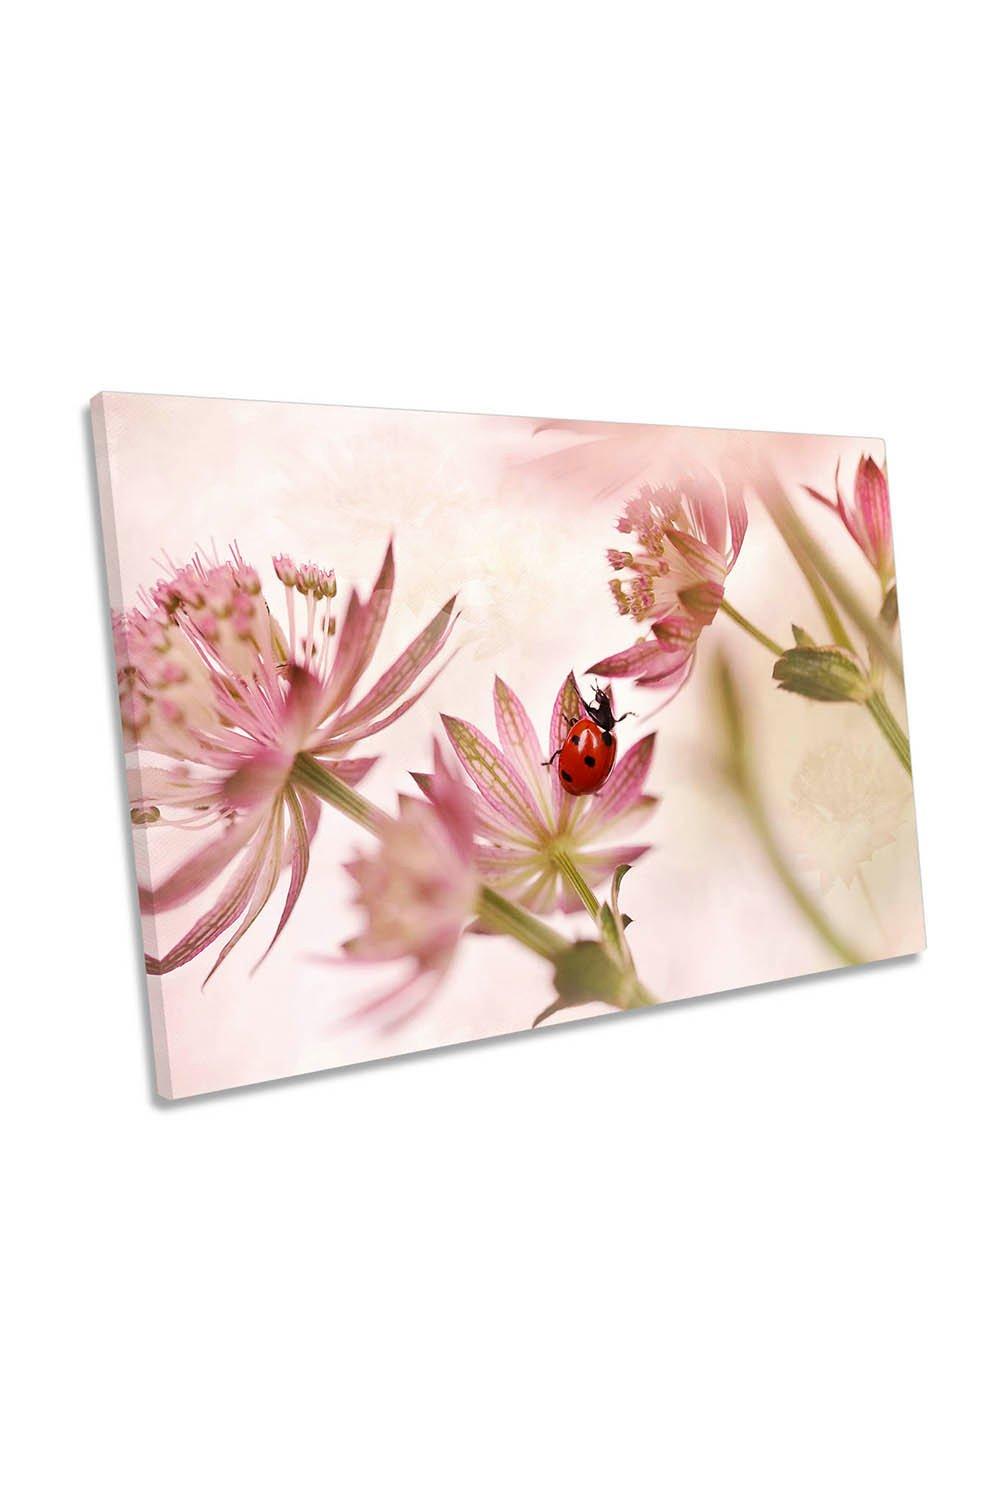 Pink Flowers Ladybird Floral Canvas Wall Art Picture Print